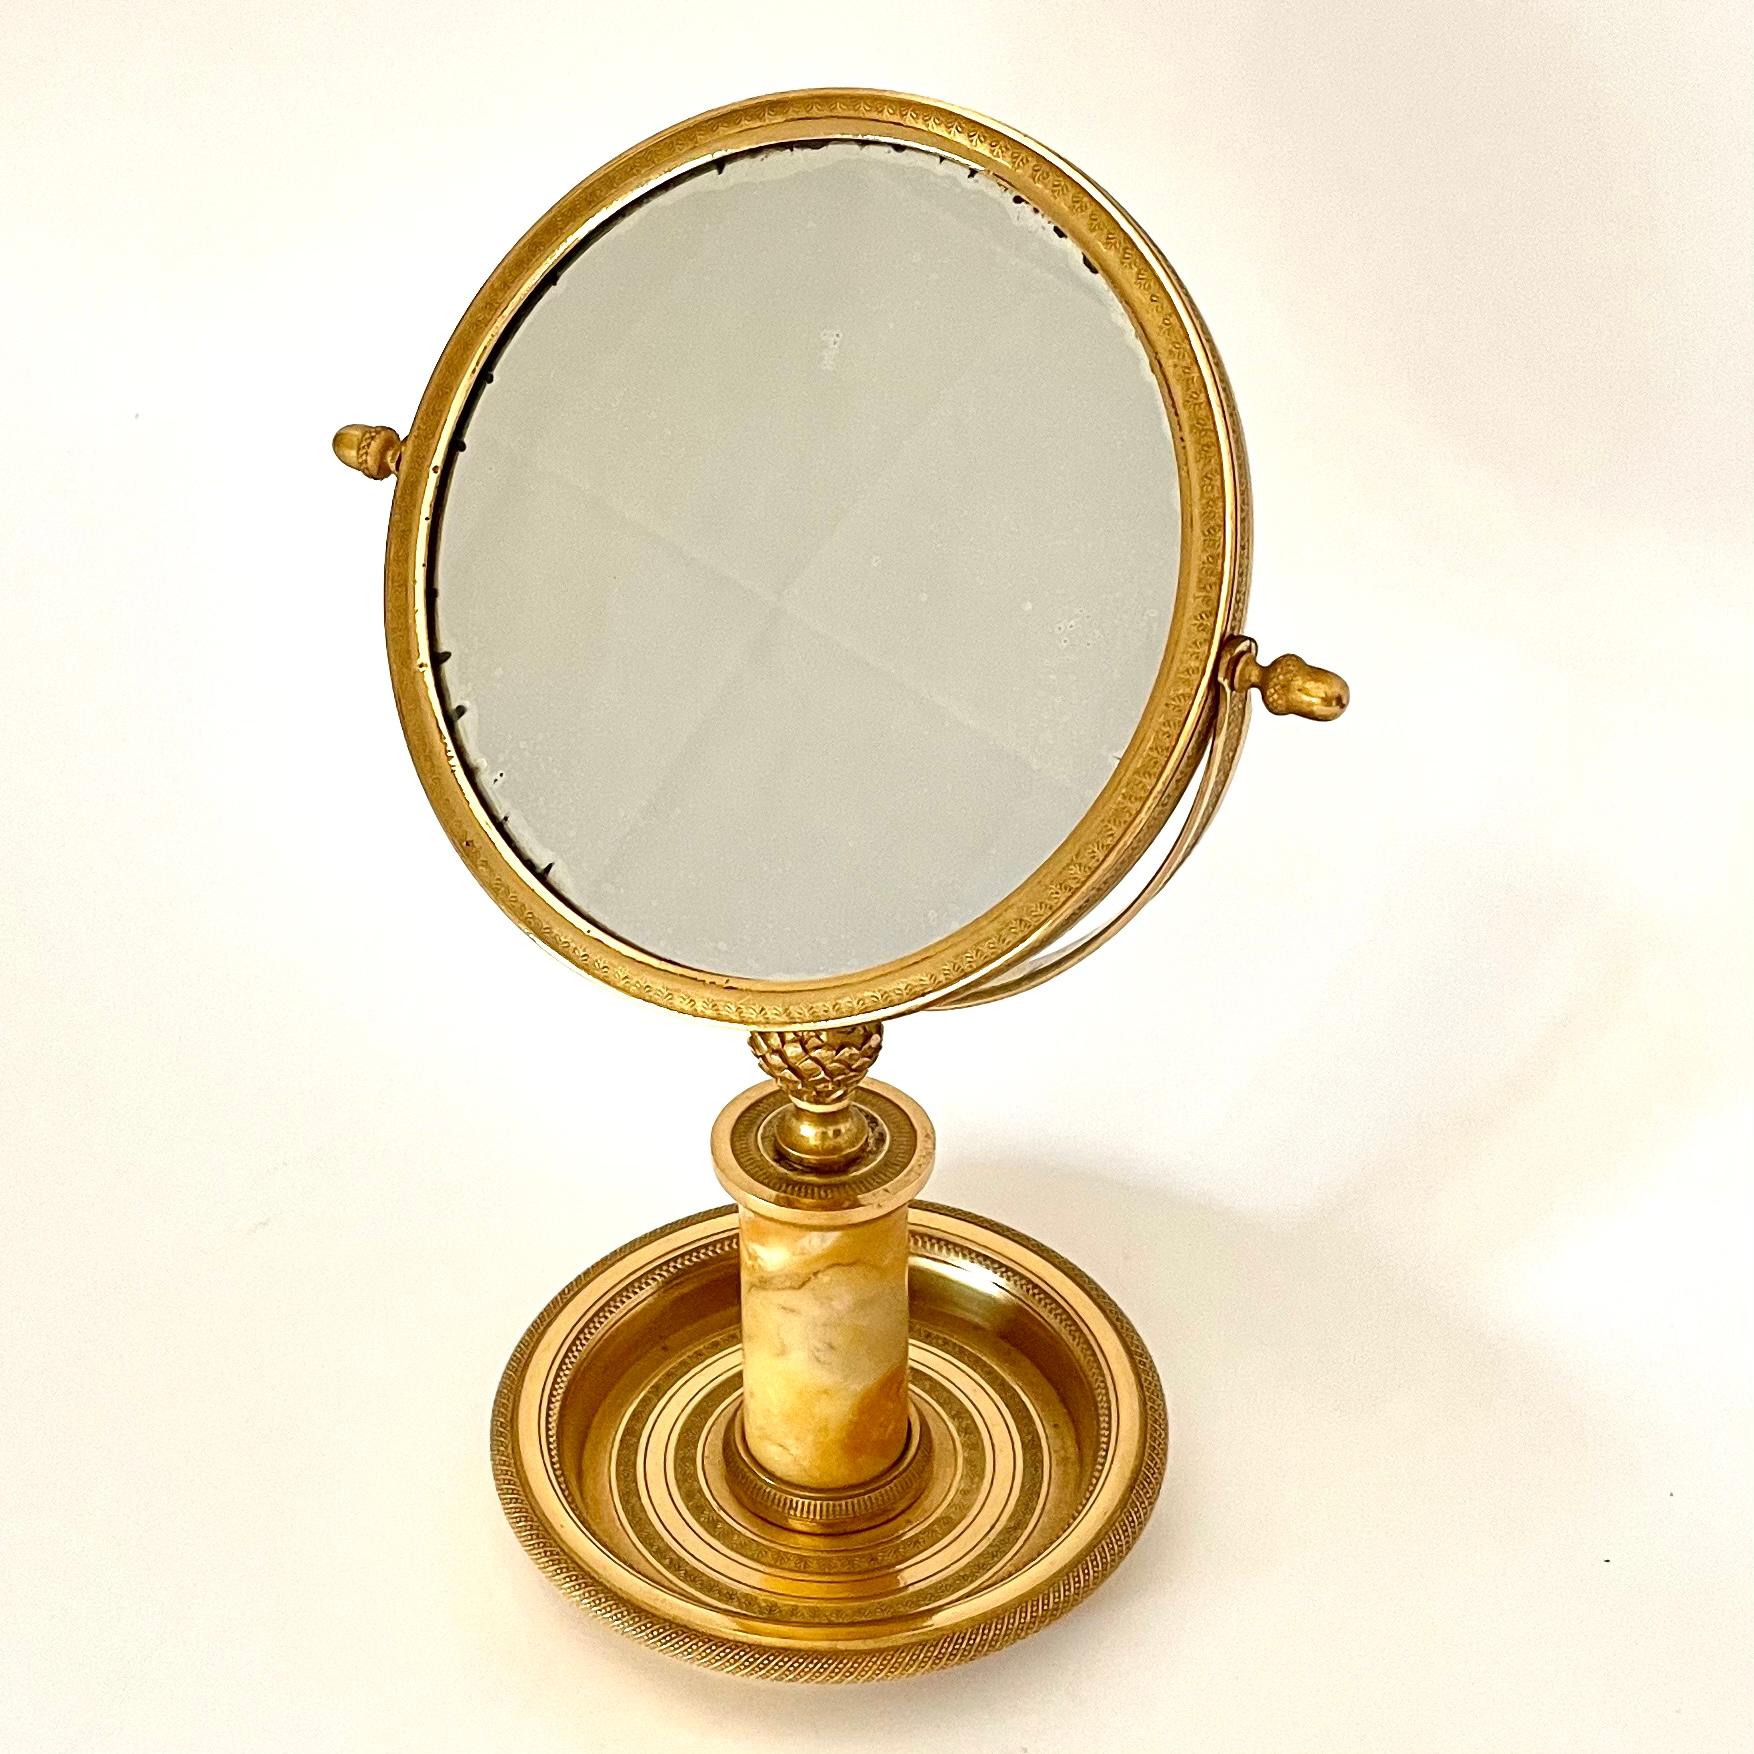 Elegant Table Mirror in gilded bronze and with a marble center. Very nice original gilding with beautiful details. French Empire from the 1820s. Good size for the dressing table or as a beautiful mirror in the hall.

Wear consistent with age and